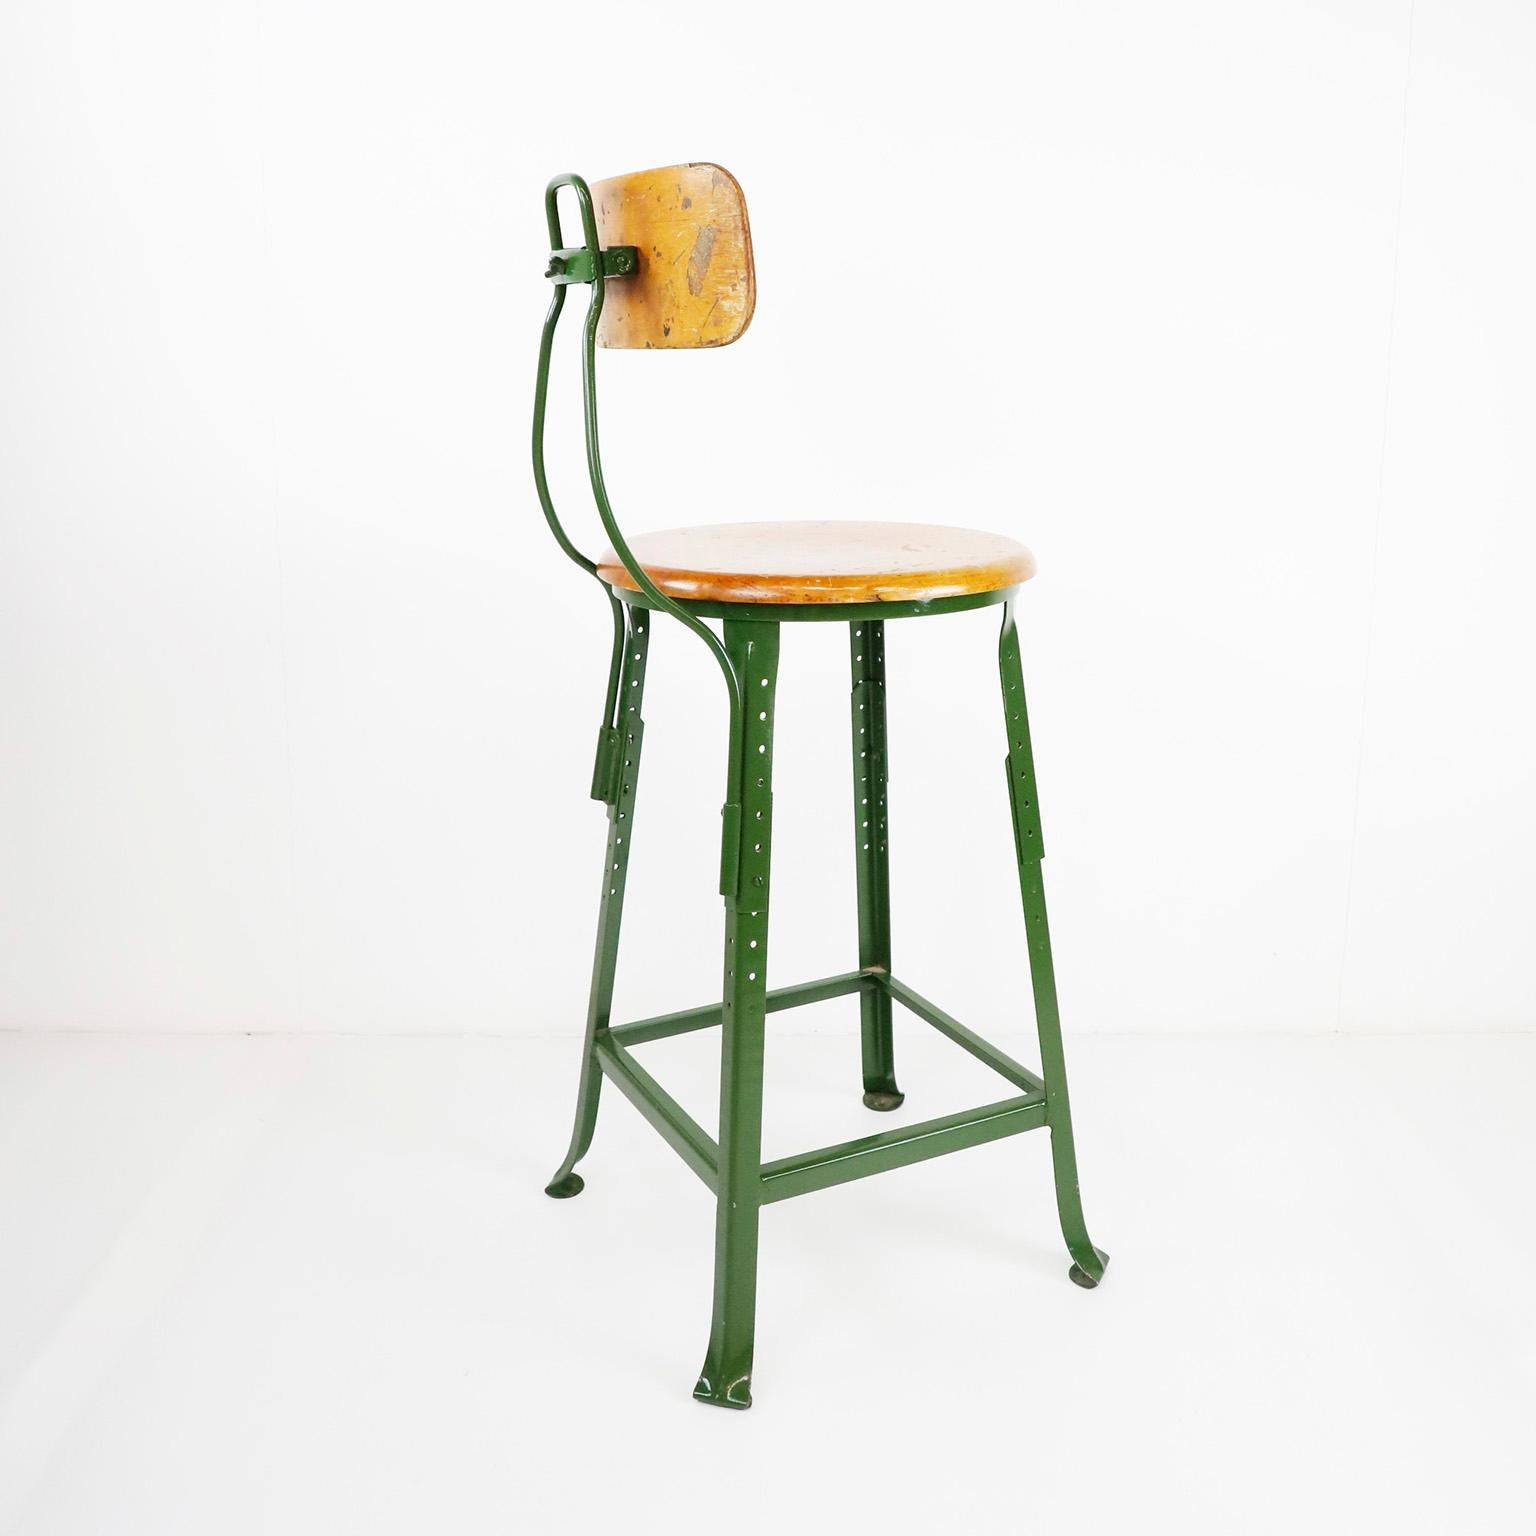 American Authentic Vintage Industrial Factory Stool For Sale